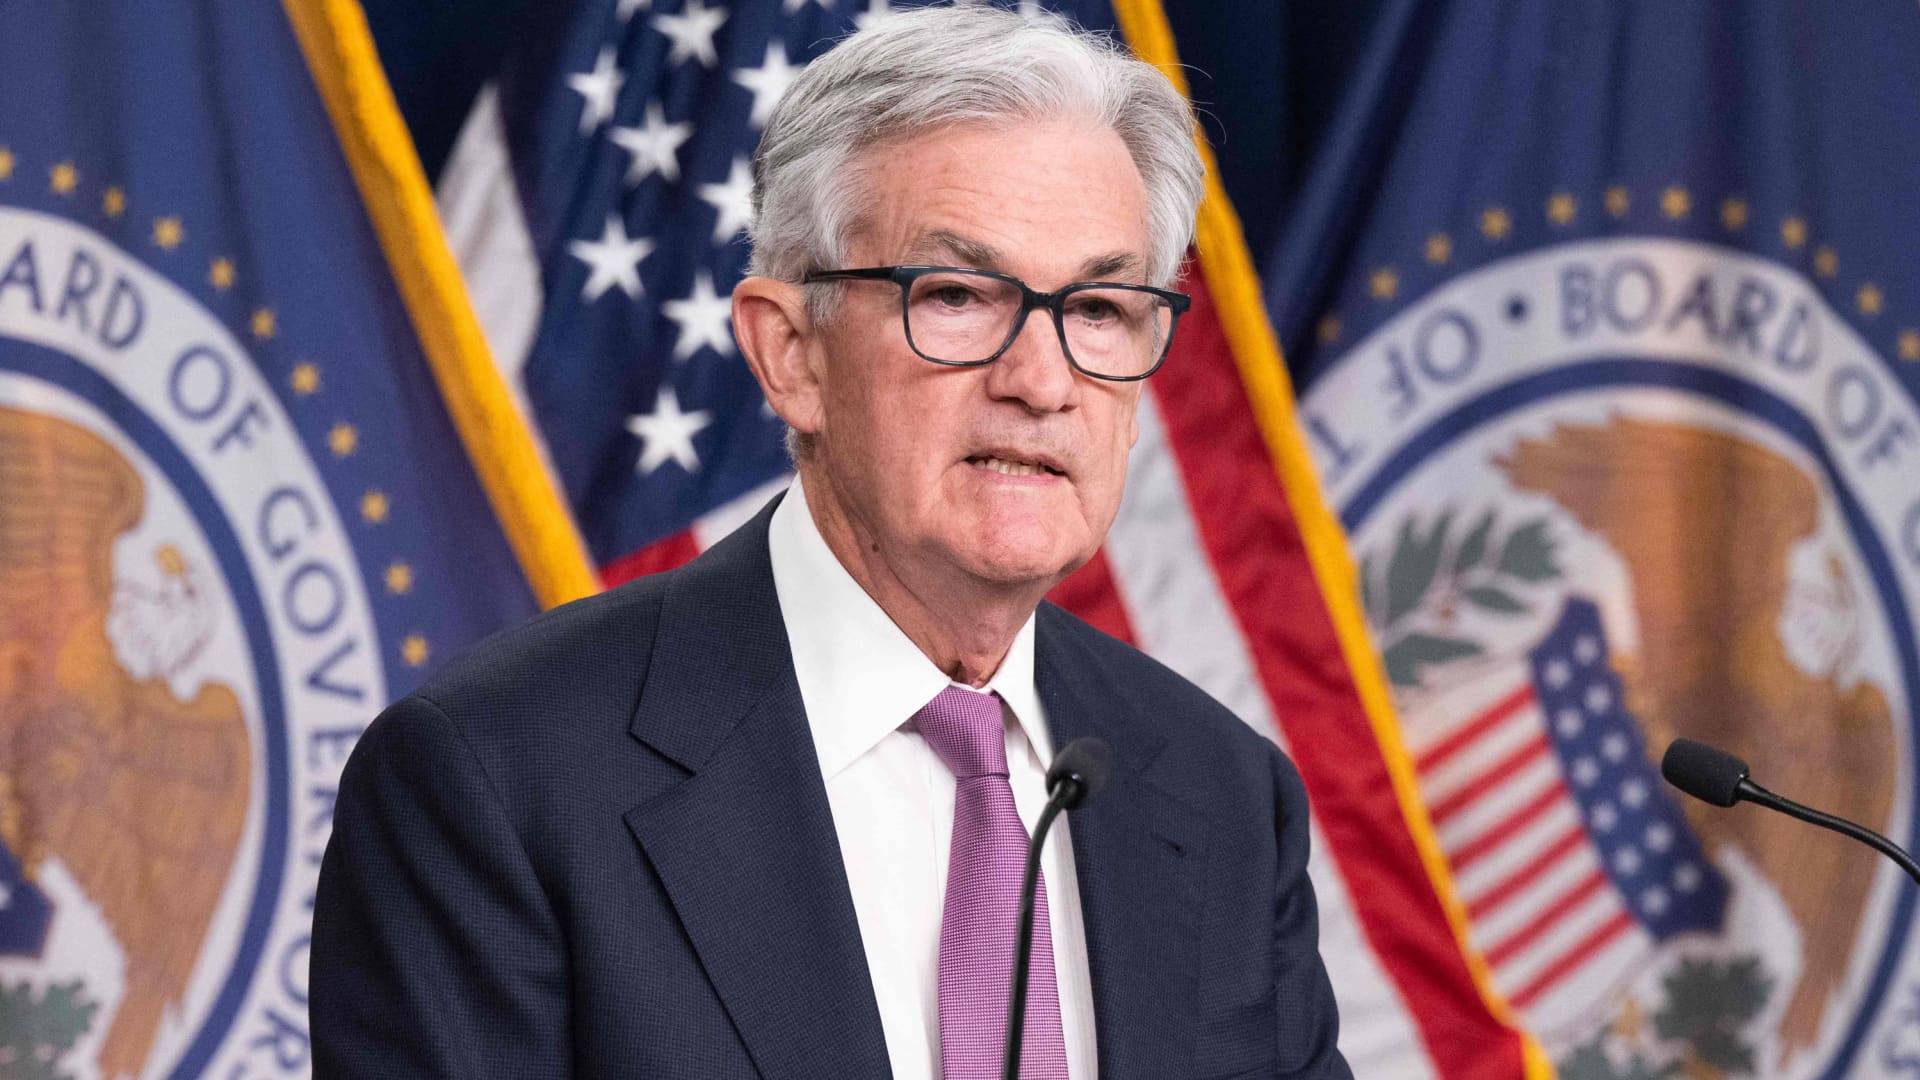 Watch Federal Reserve Chair Jerome Powell discuss inflation, interest rates and the economy